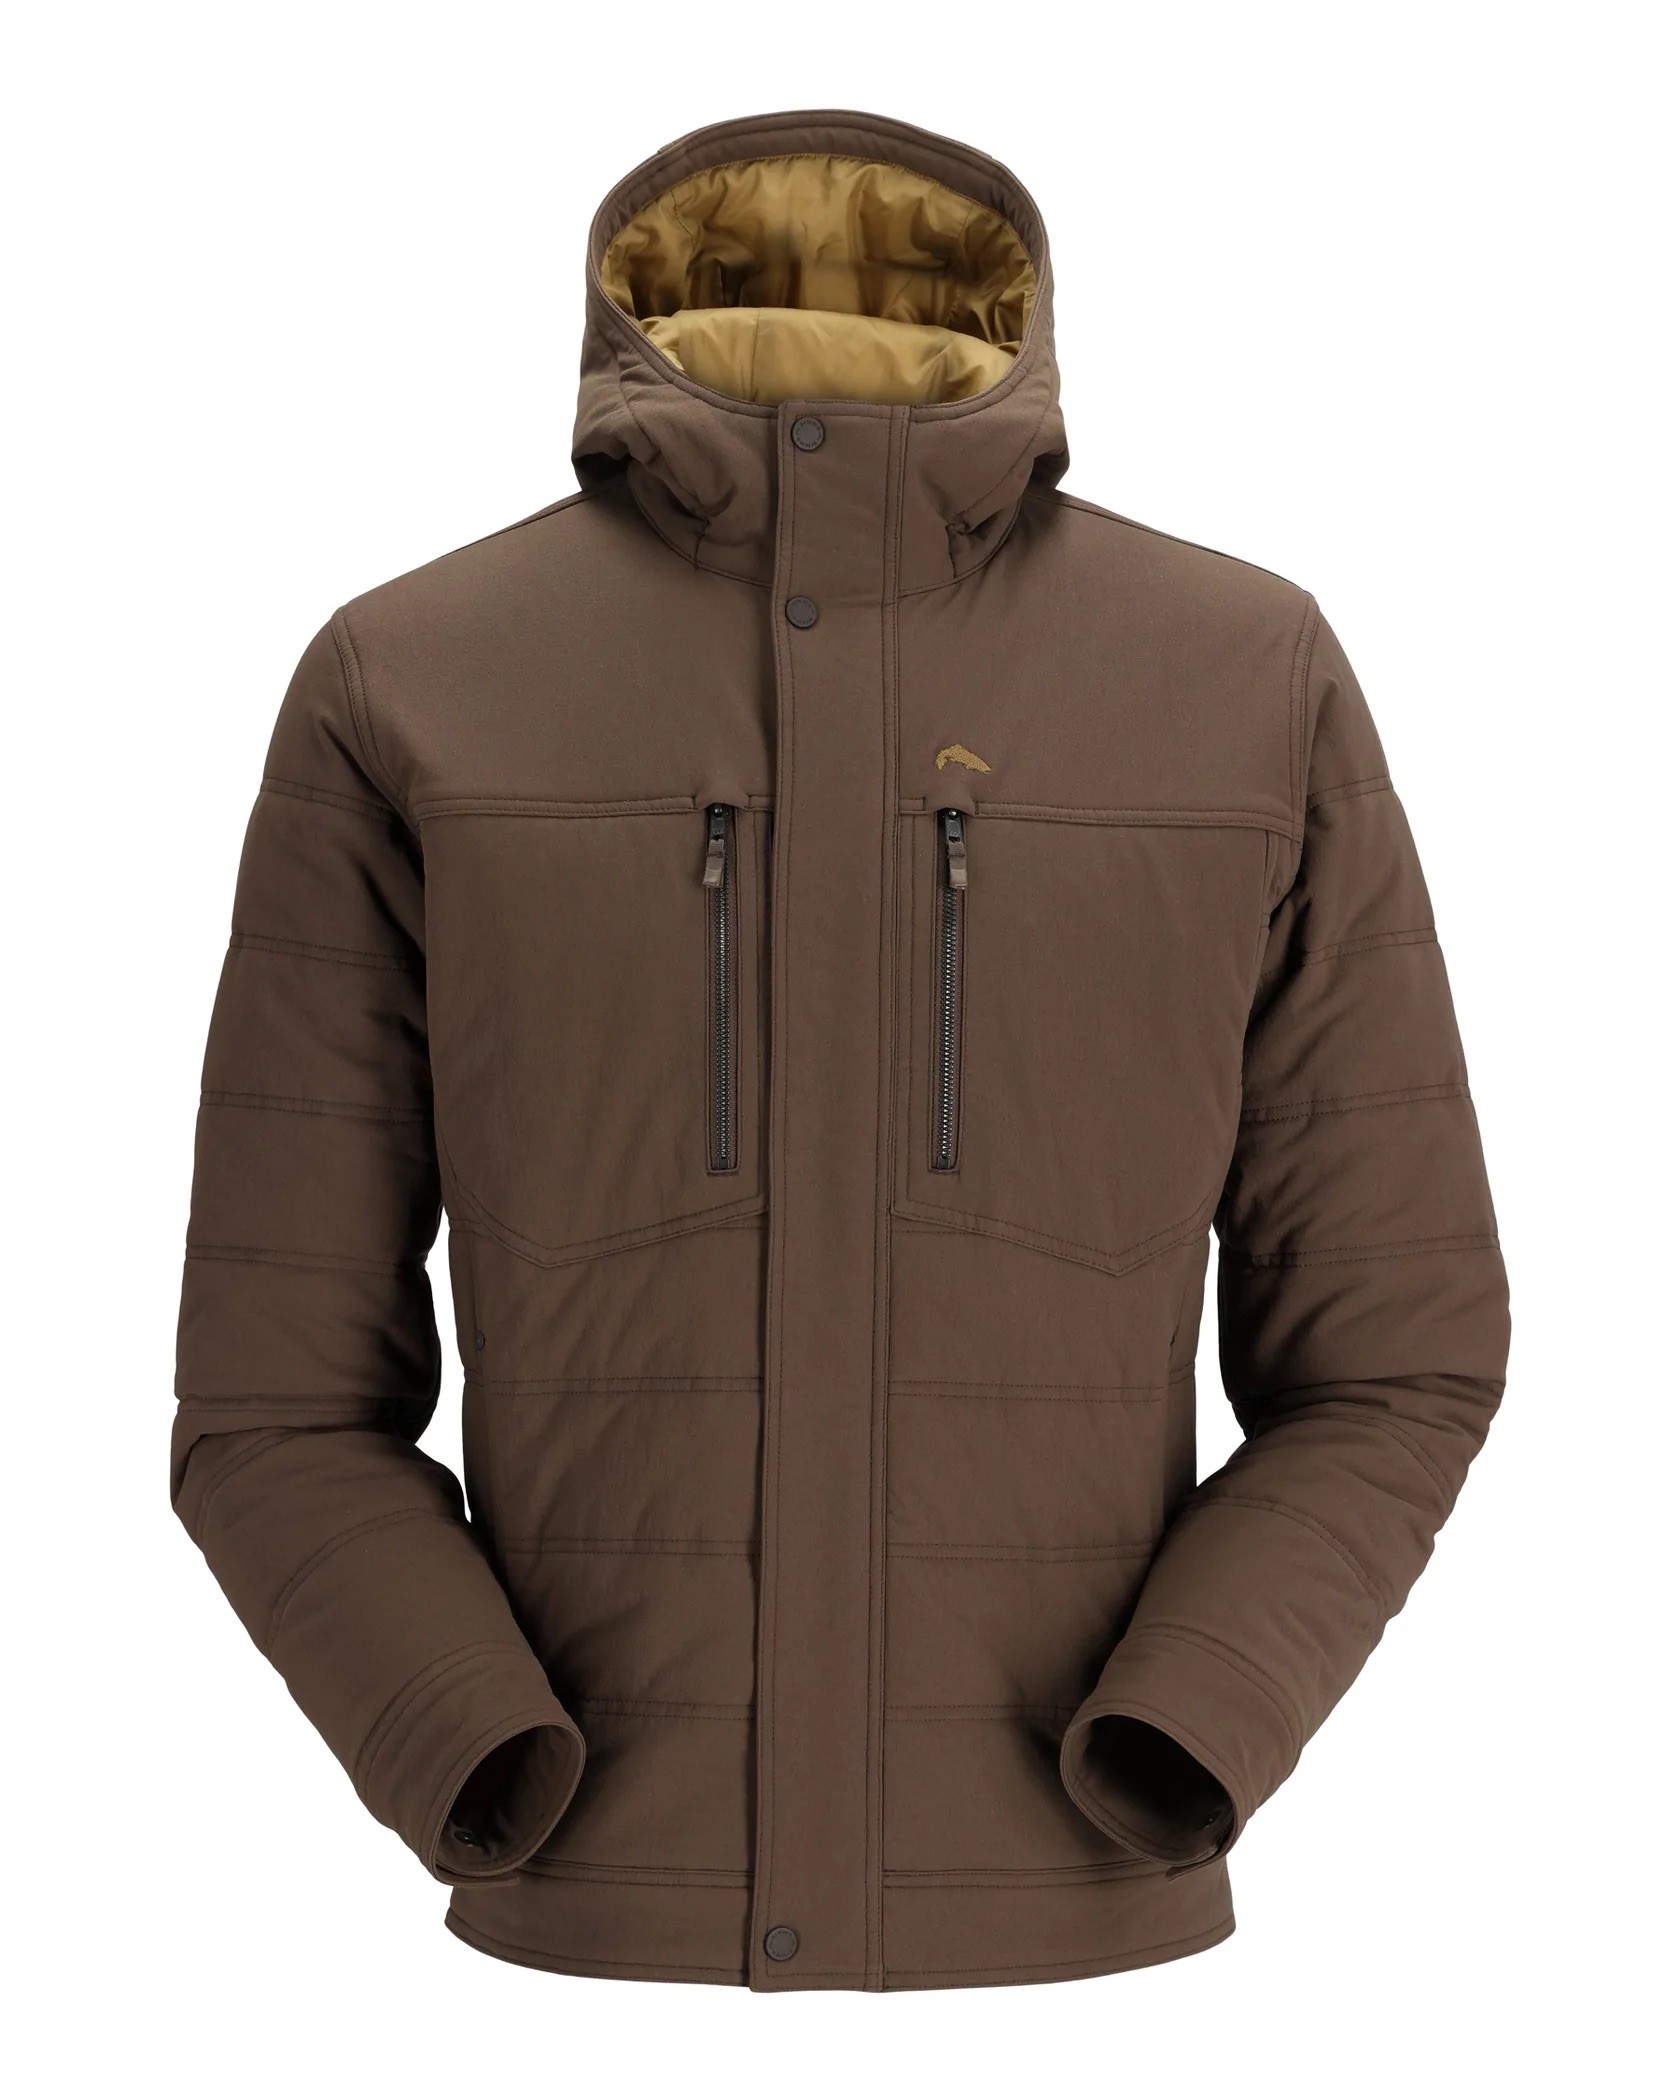 Simms M's Cardwell Hooded Jacket - Hickory - Large